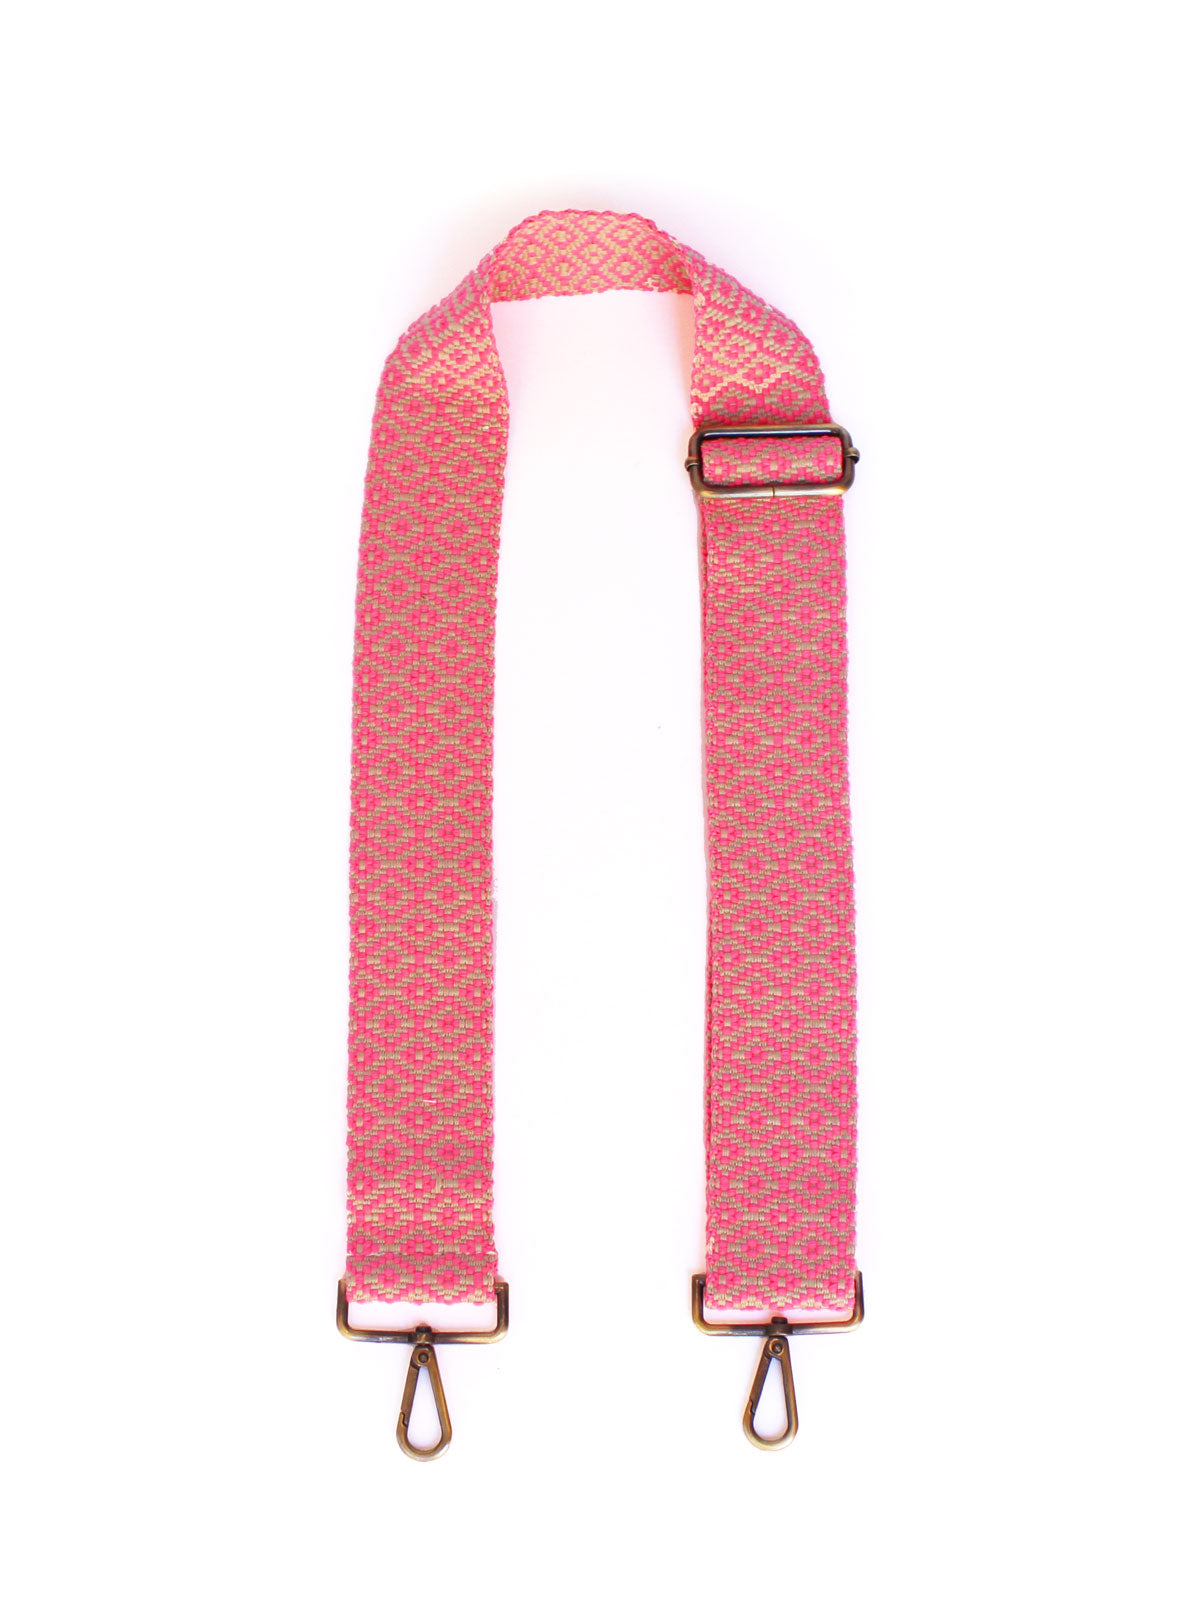 Southwest Strap in Hot Pink